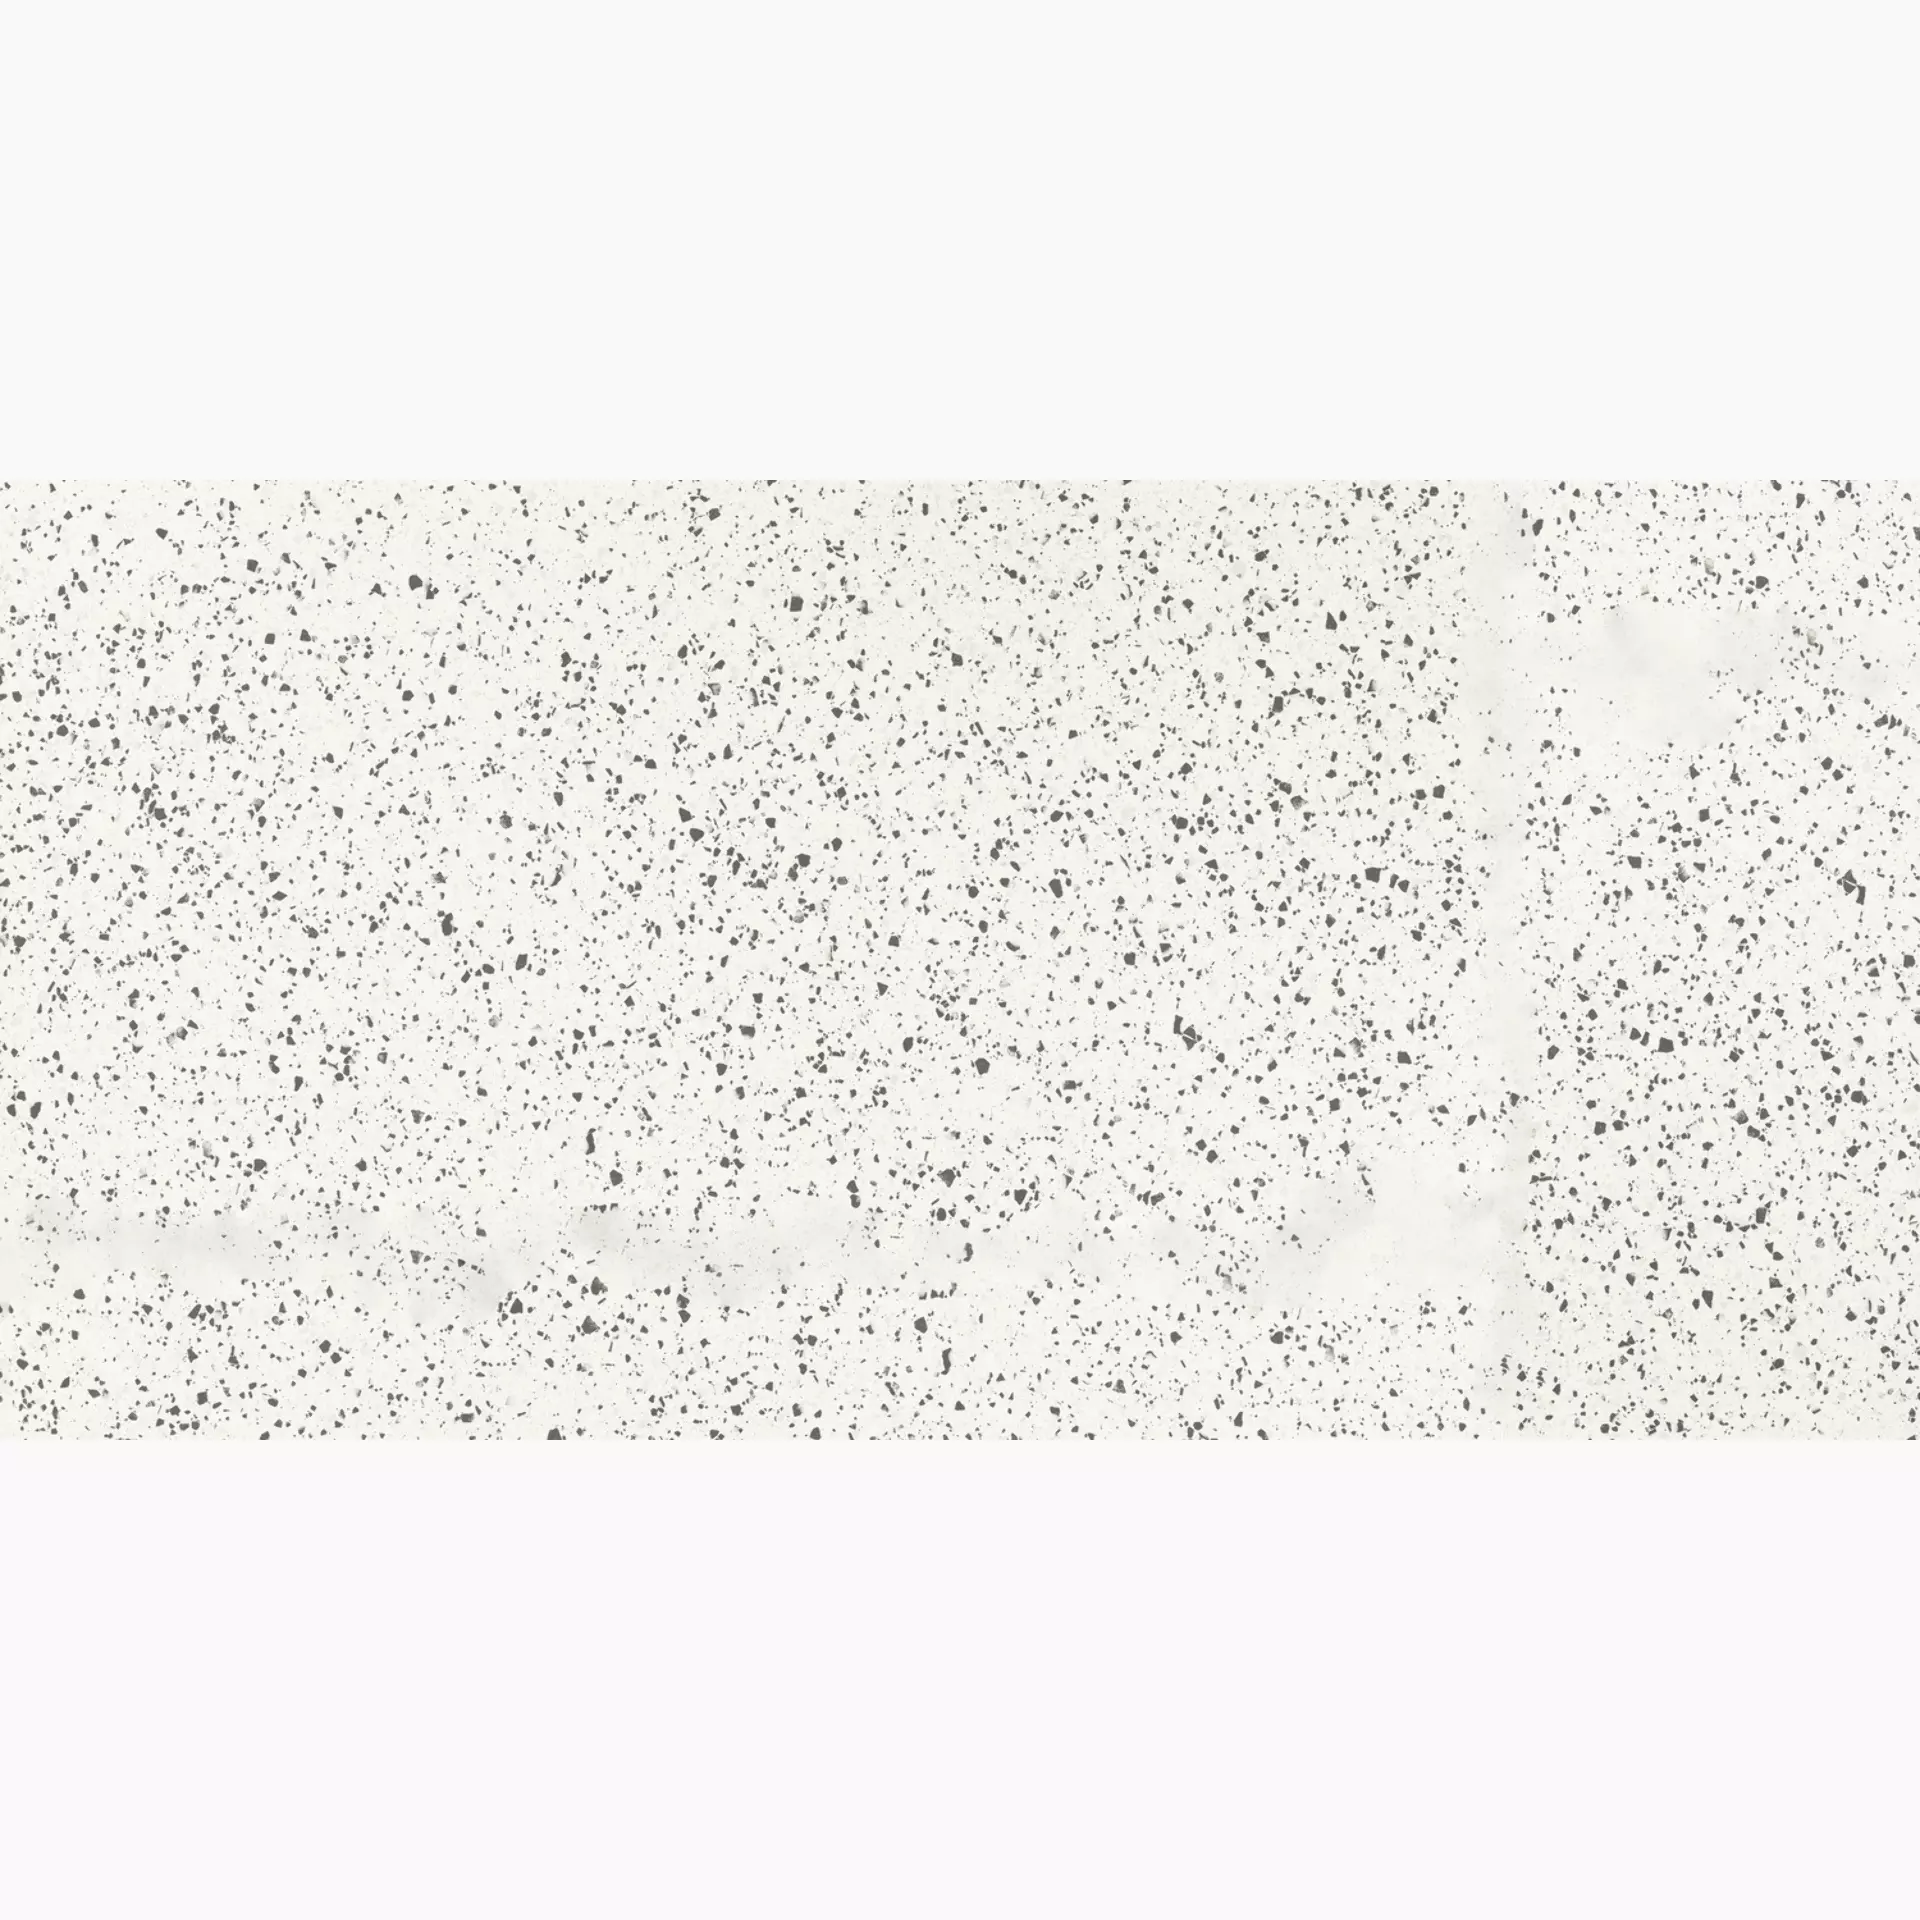 FMG Rialto White Naturale P175420 75x150cm rectified 10mm